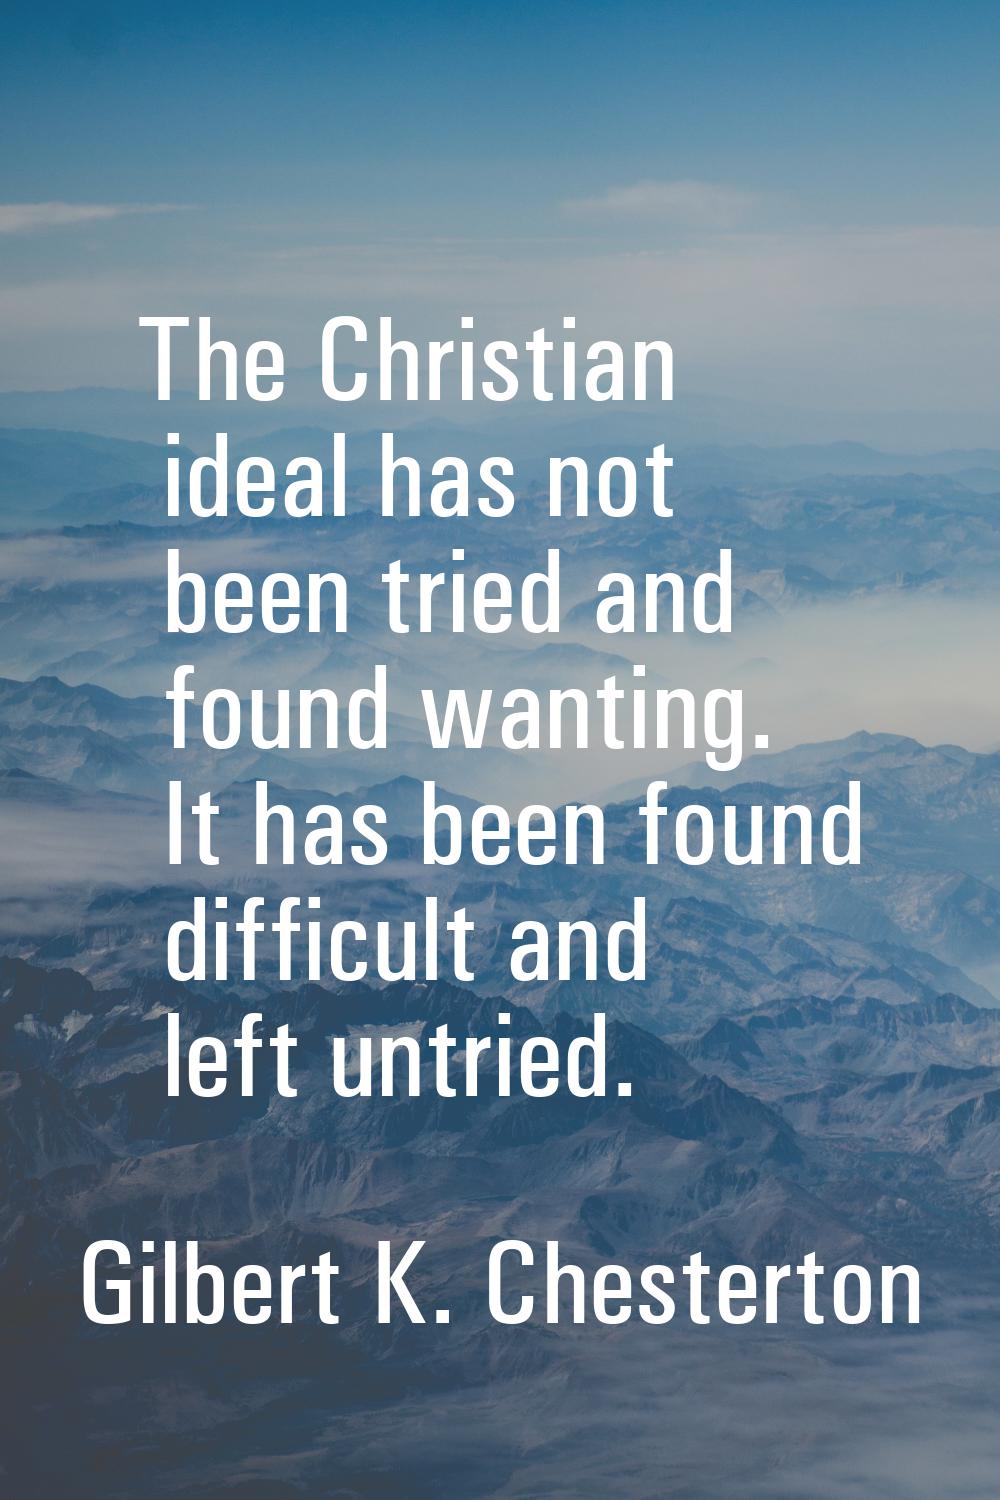 The Christian ideal has not been tried and found wanting. It has been found difficult and left untr